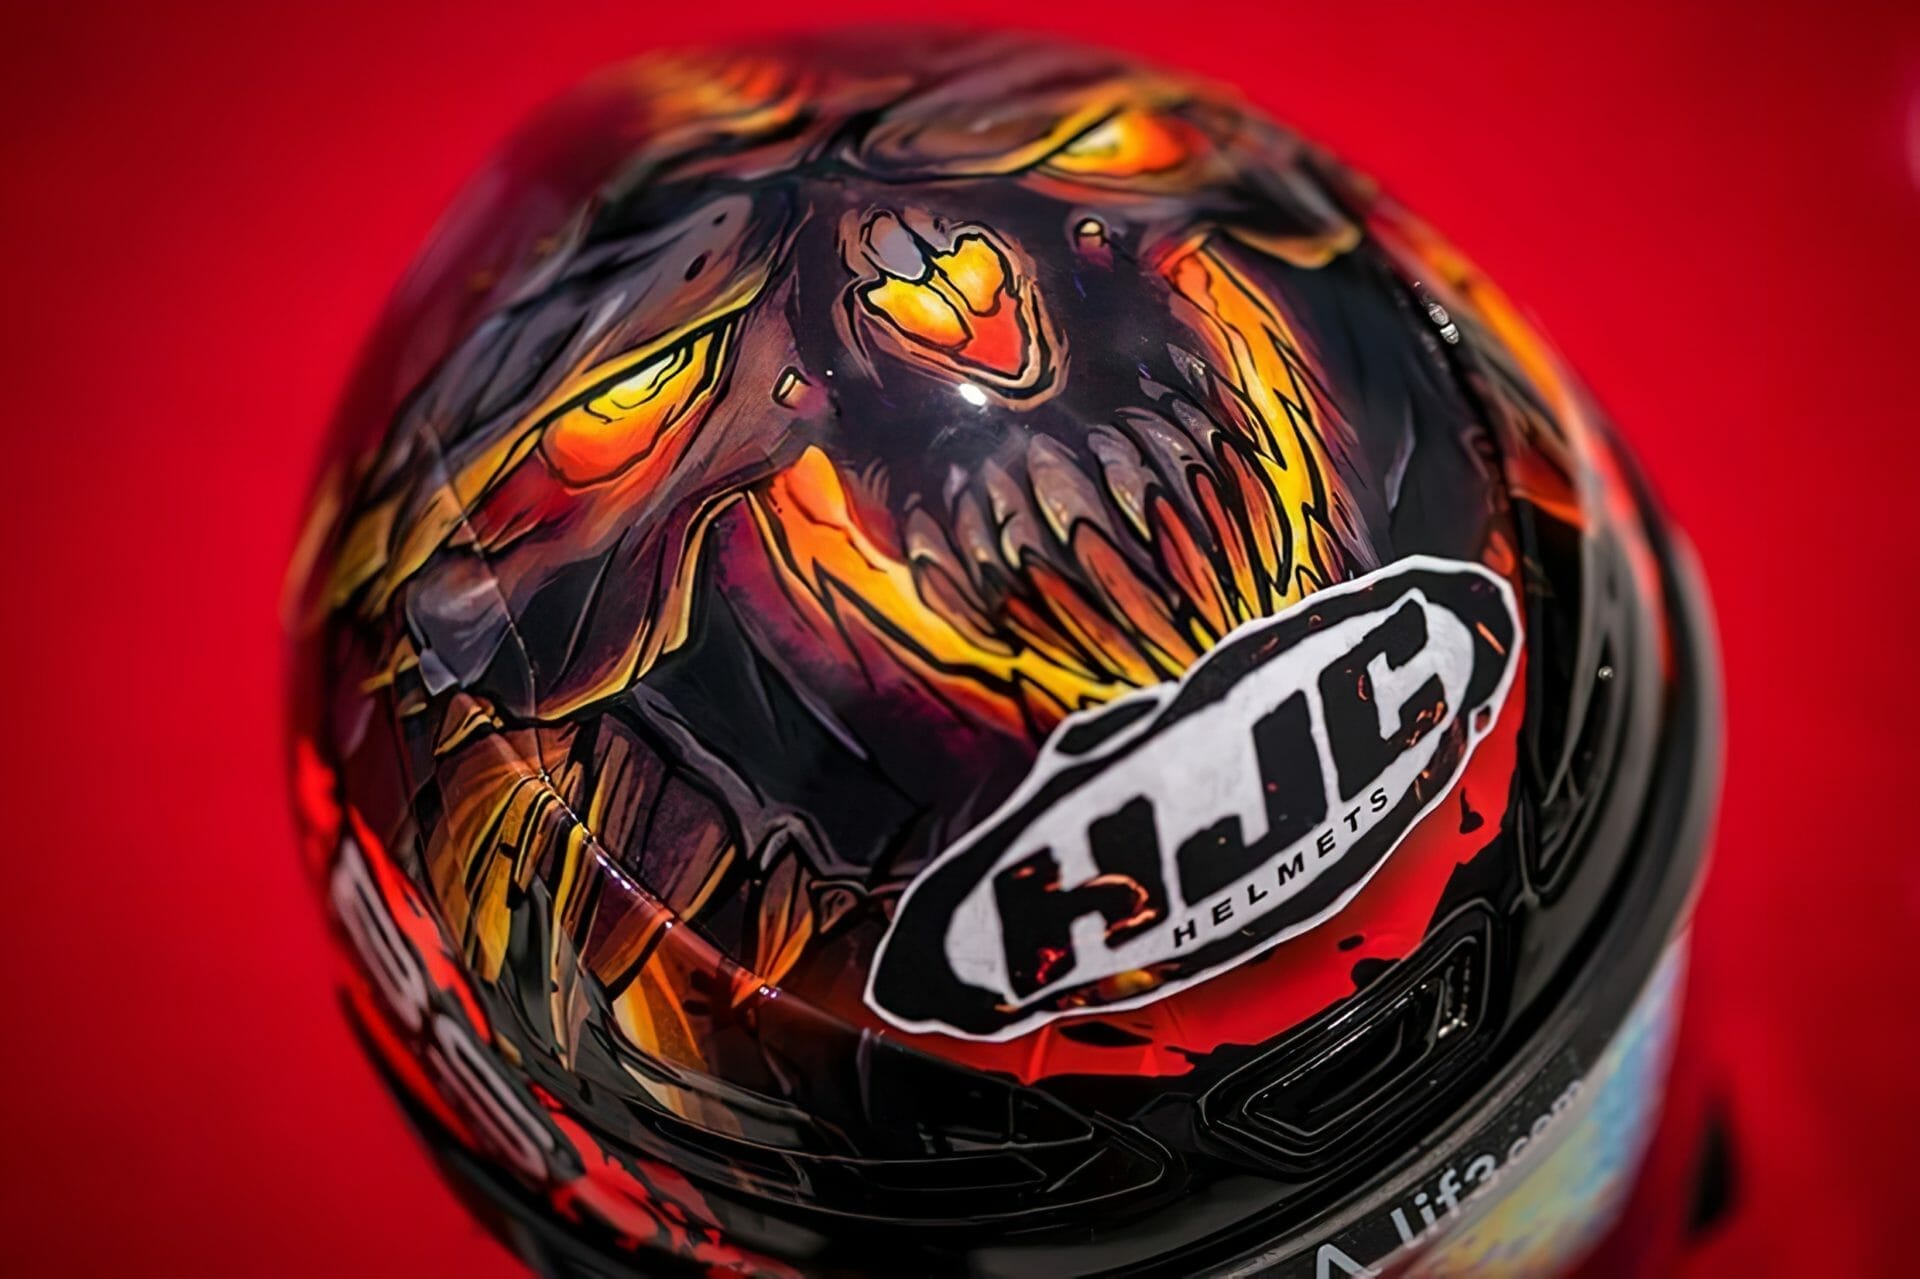 HJC’s new Diablo helmet: a blend of style and safety